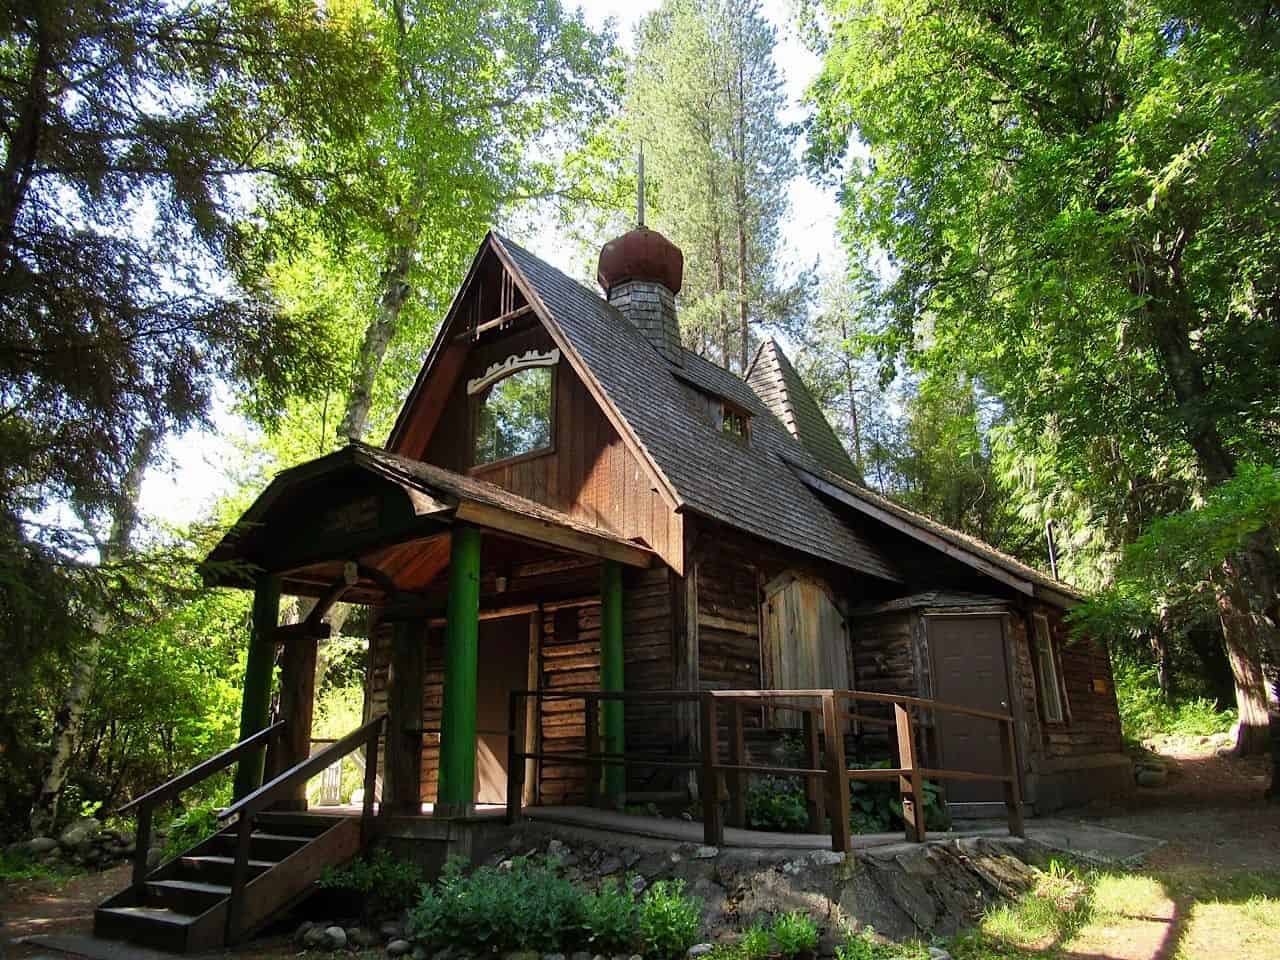 Russian Orthodox style wooden building tucked in heavily-treed landscape in Castlegar BC.